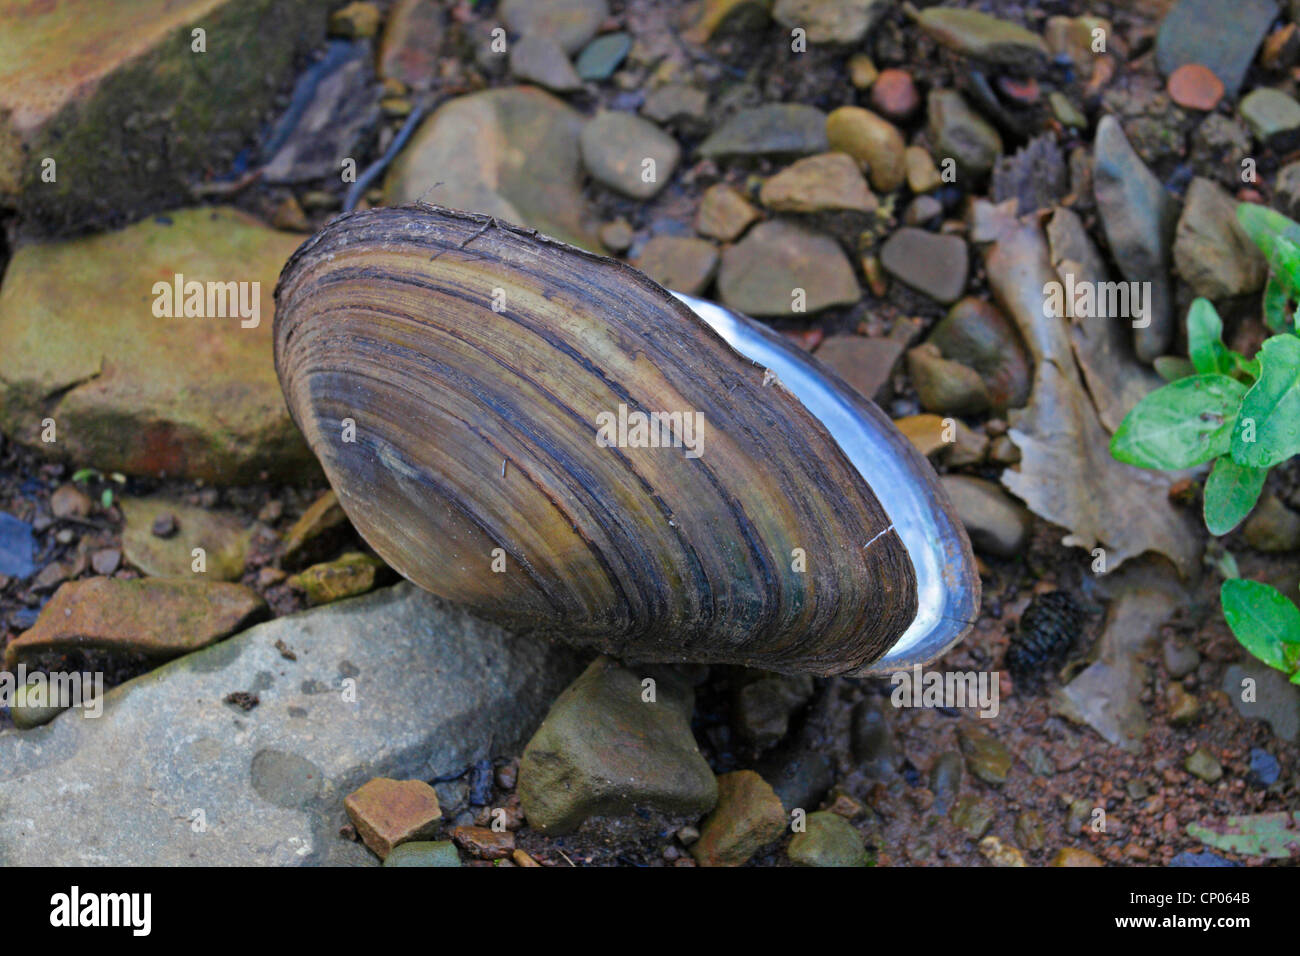 pond mussels, floaters (Anodonta spec.), empty shells on wet soil ground, Germany, Baden-Wuerttemberg Stock Photo